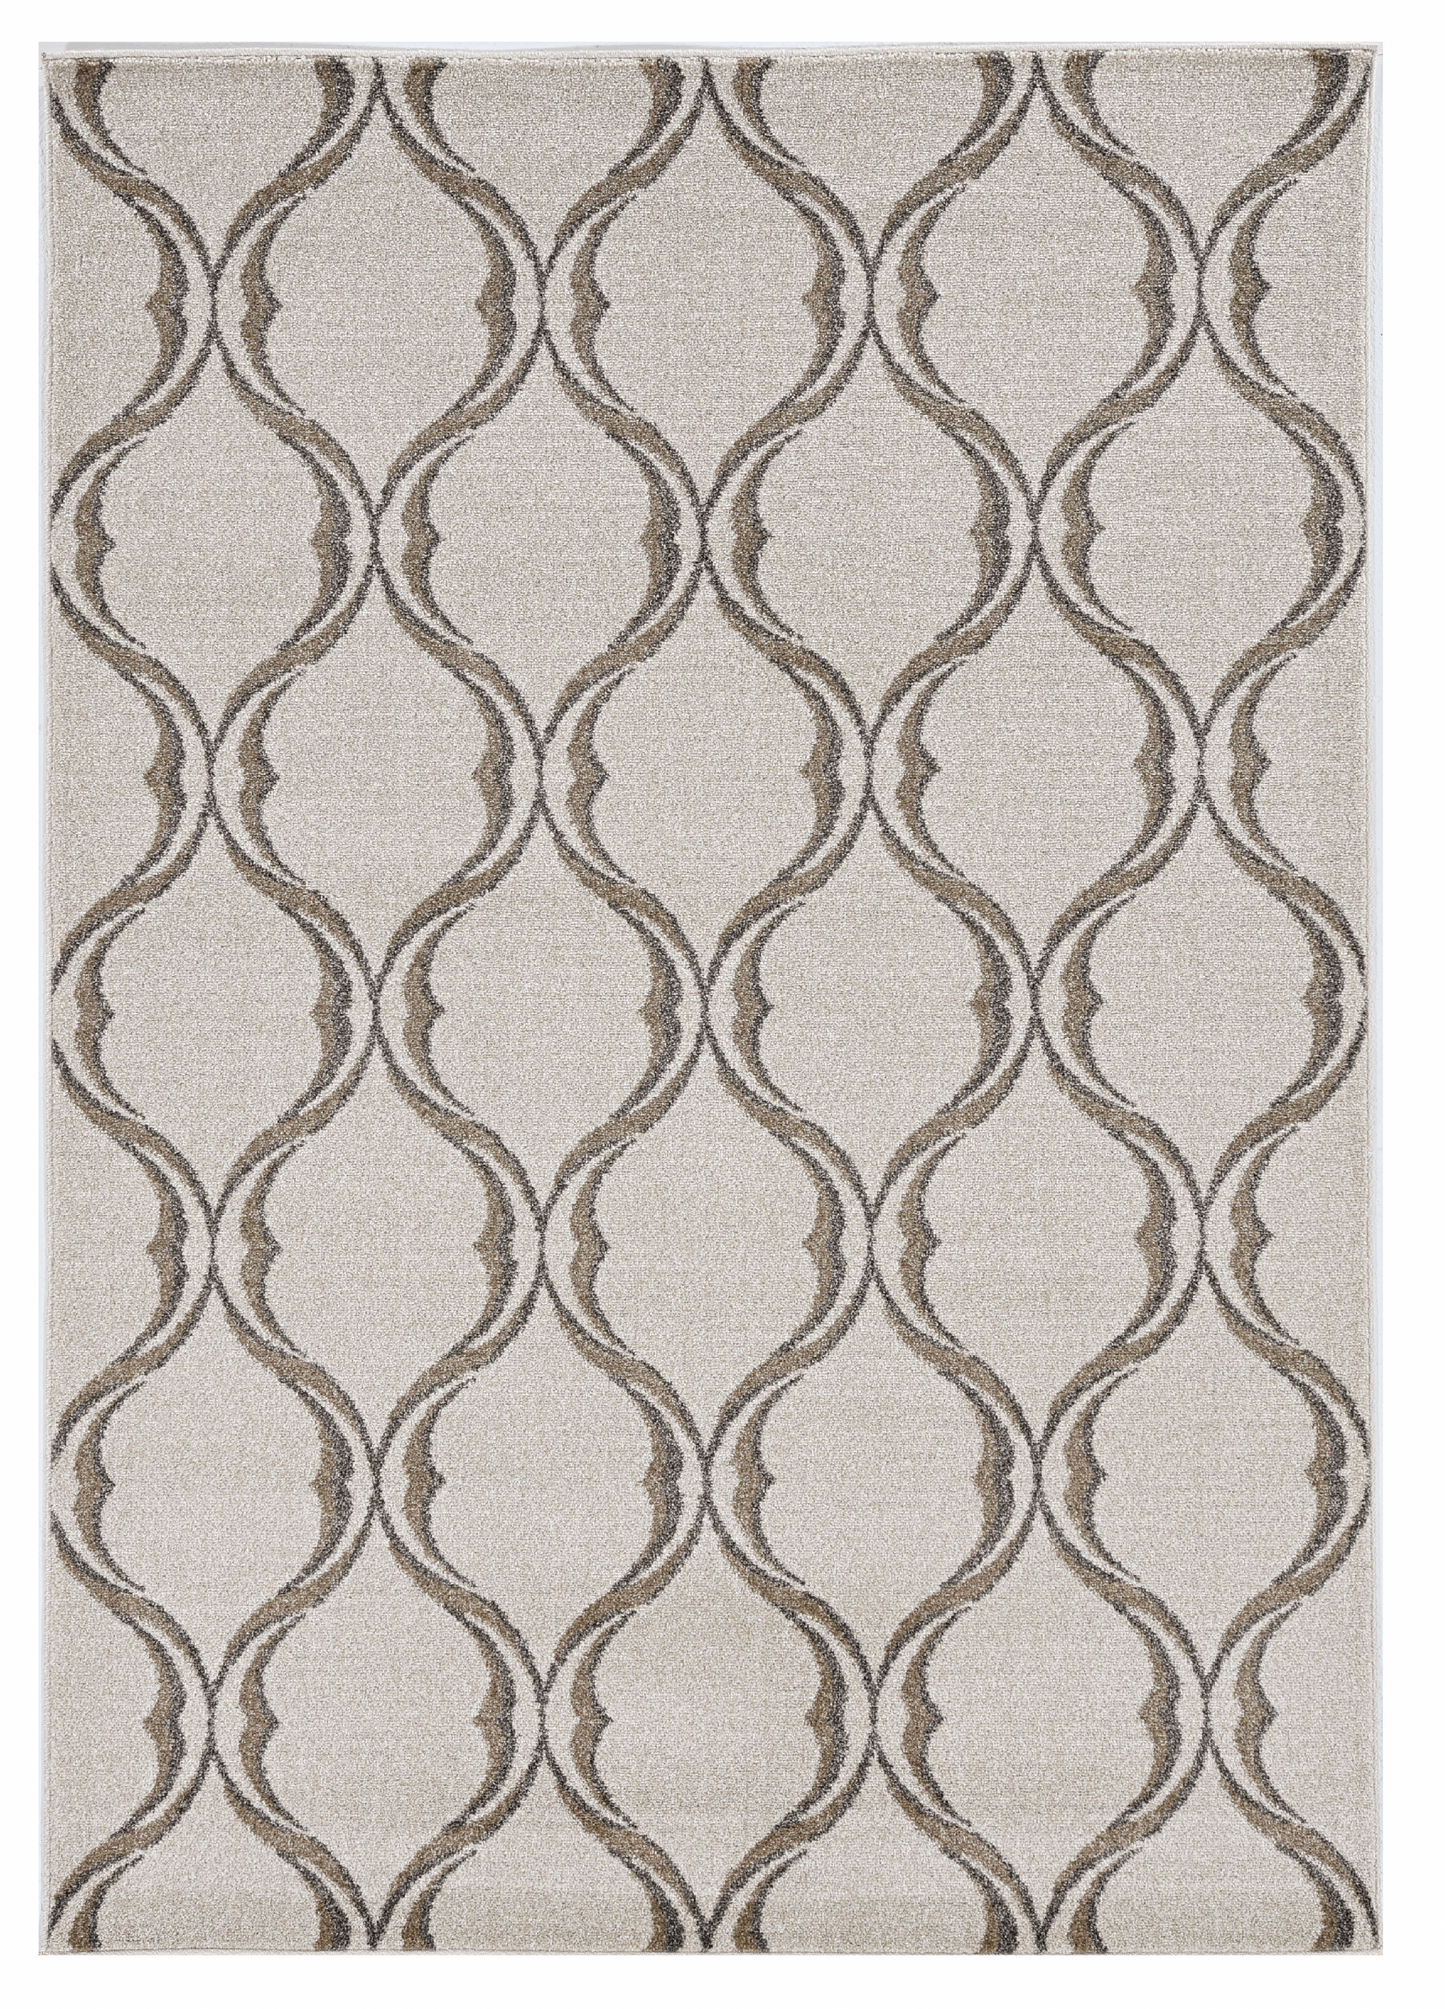 7'X10' Sand Ivory Machine Woven Uv Treated Ogee Indoor Outdoor Area Rug